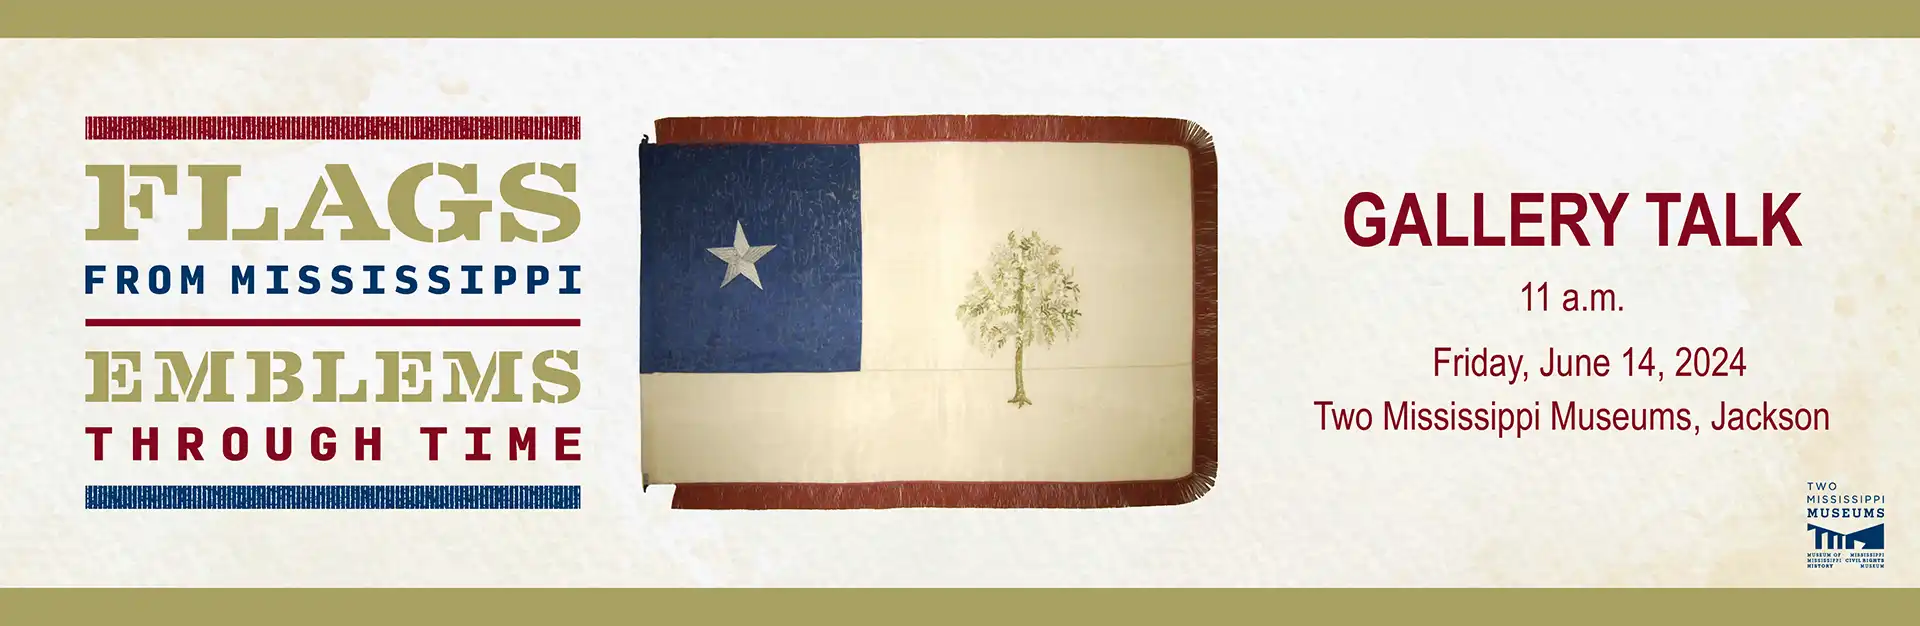 Flags from Mississippi - Emblems Through Time Gallery Talk, June 14, 2024